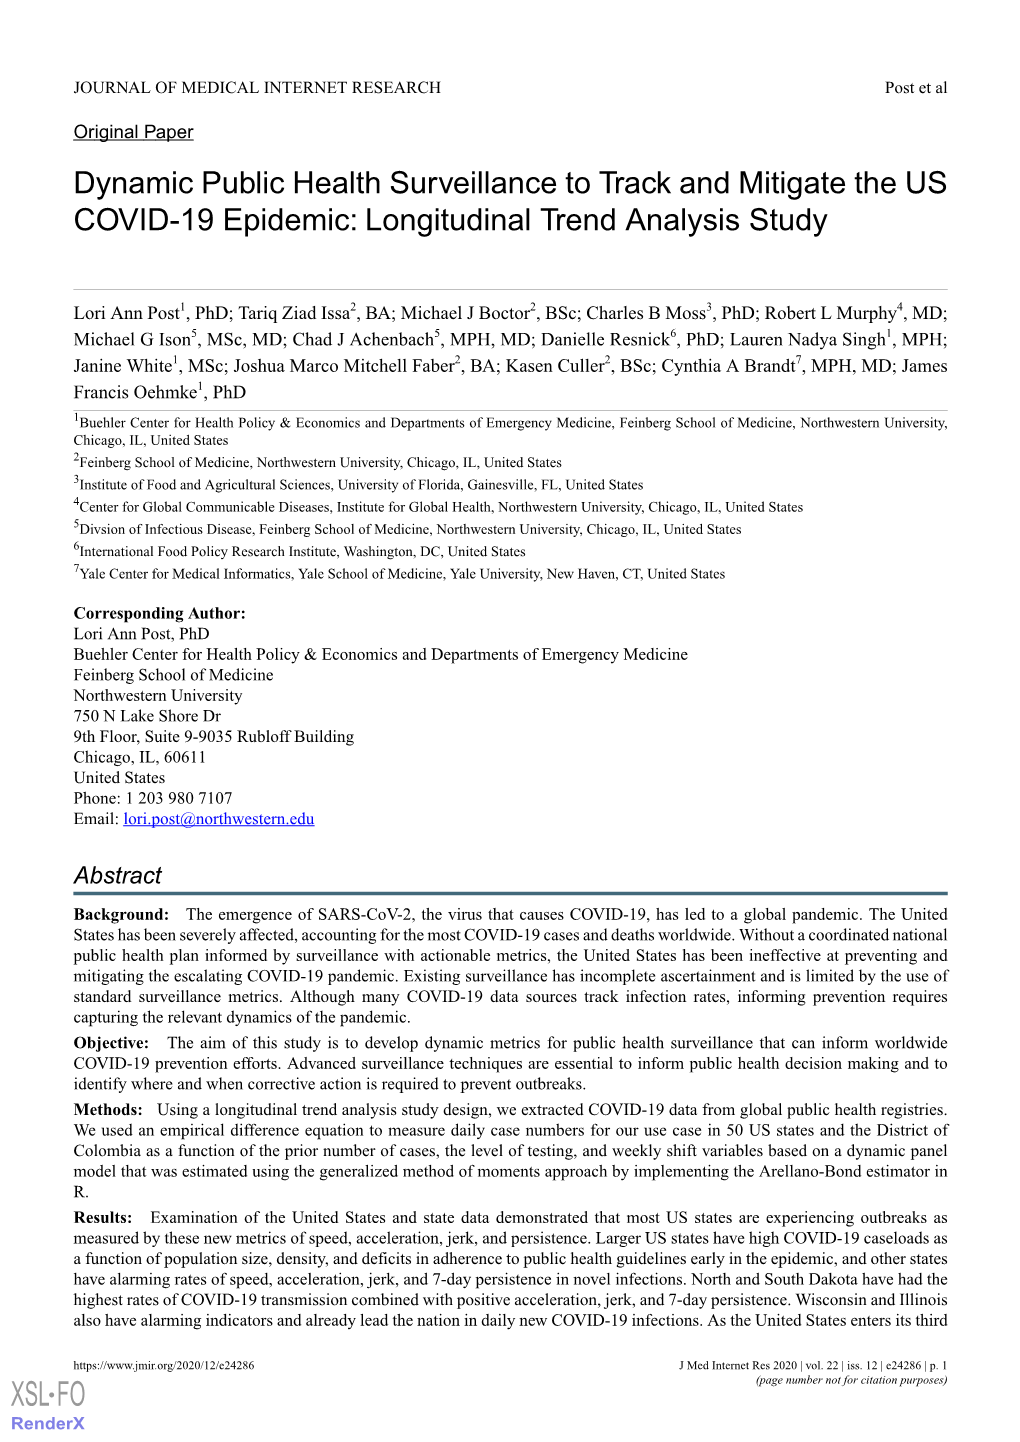 Dynamic Public Health Surveillance to Track and Mitigate the US COVID-19 Epidemic: Longitudinal Trend Analysis Study